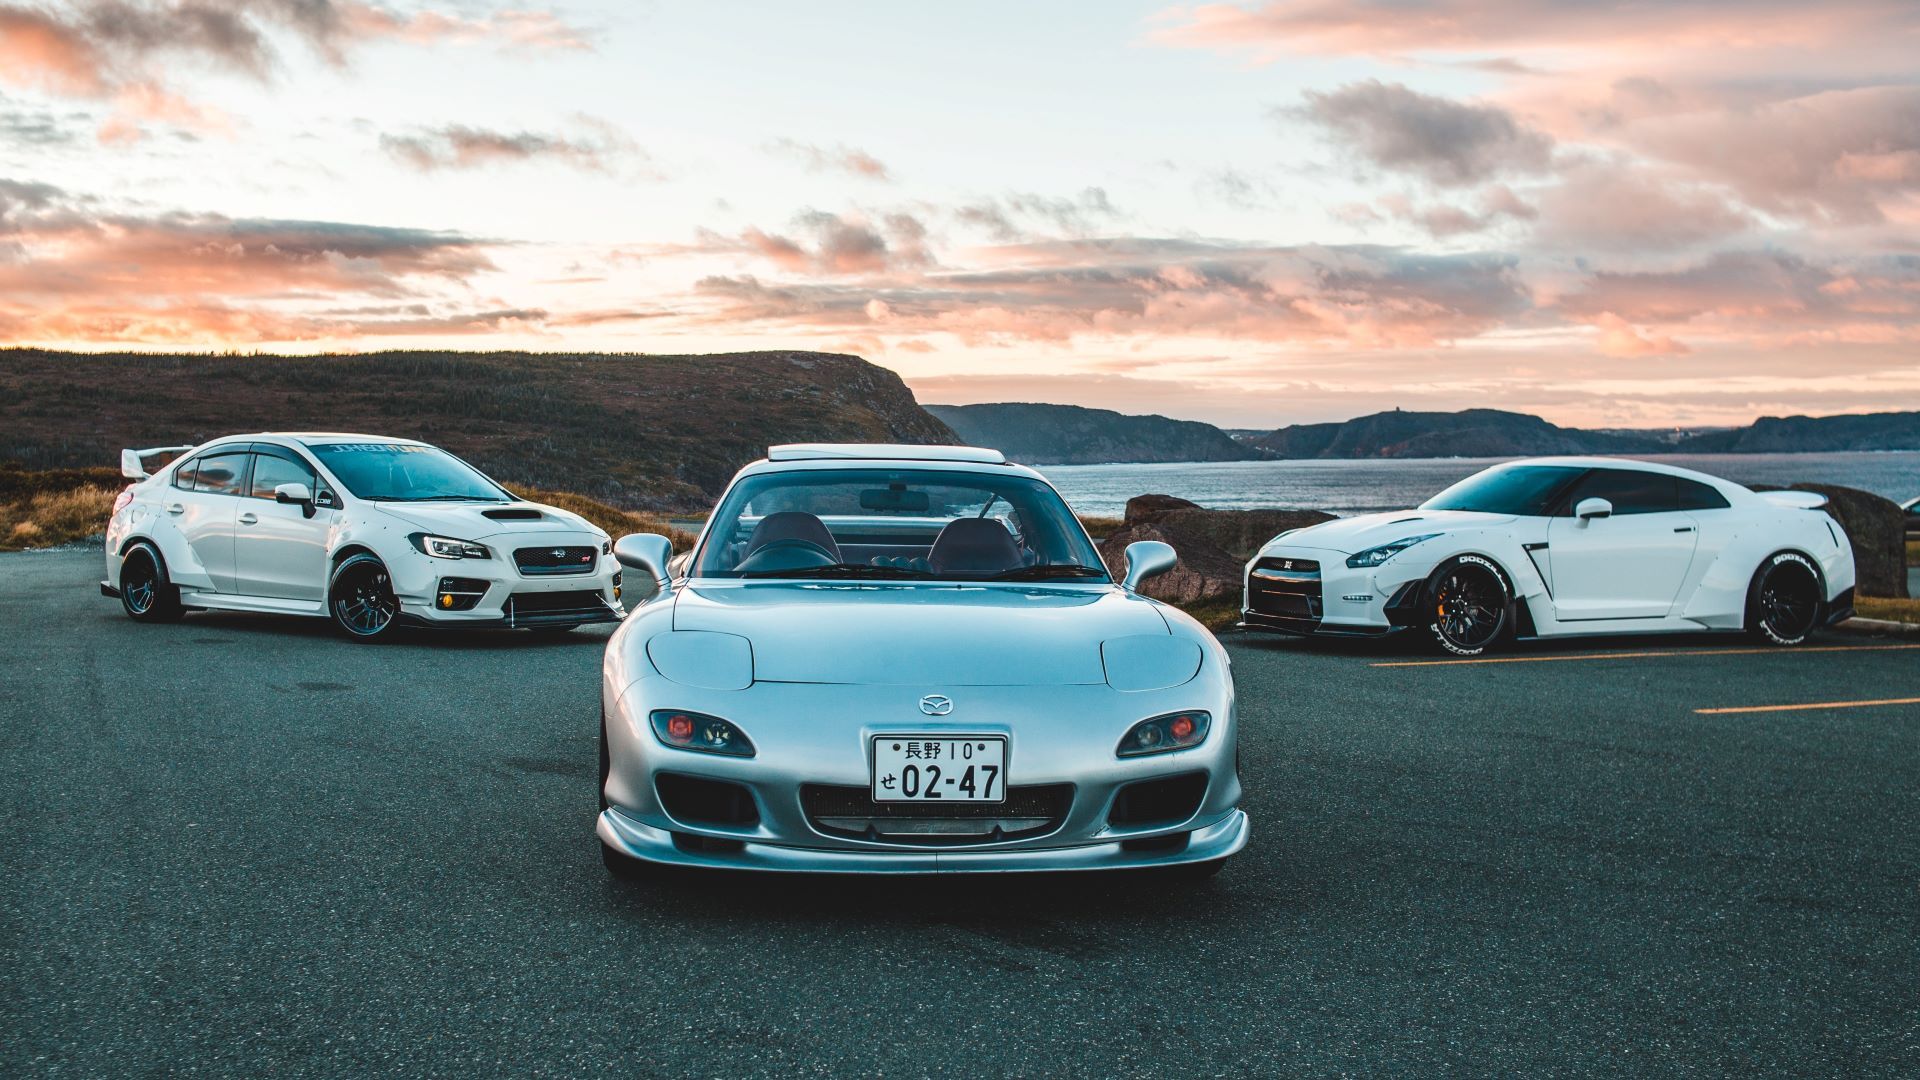 A shot depicting a Mazda RX-7, Nissan GT-R, and Subaru WRX parked